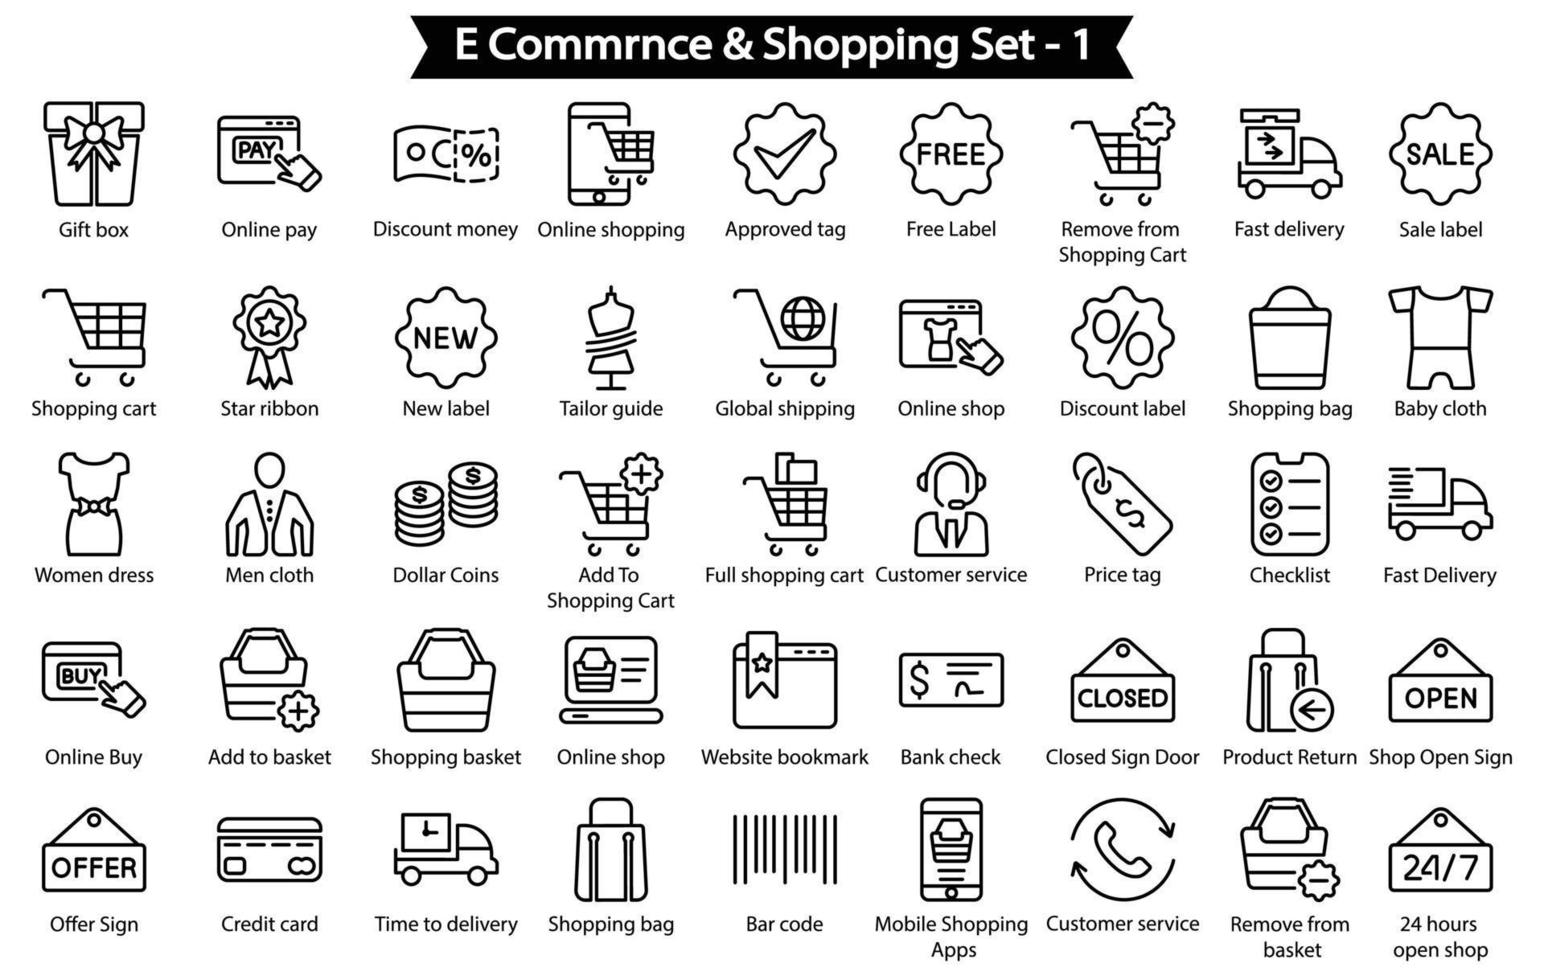 E Commrnce And shopping Line Icon Set vector